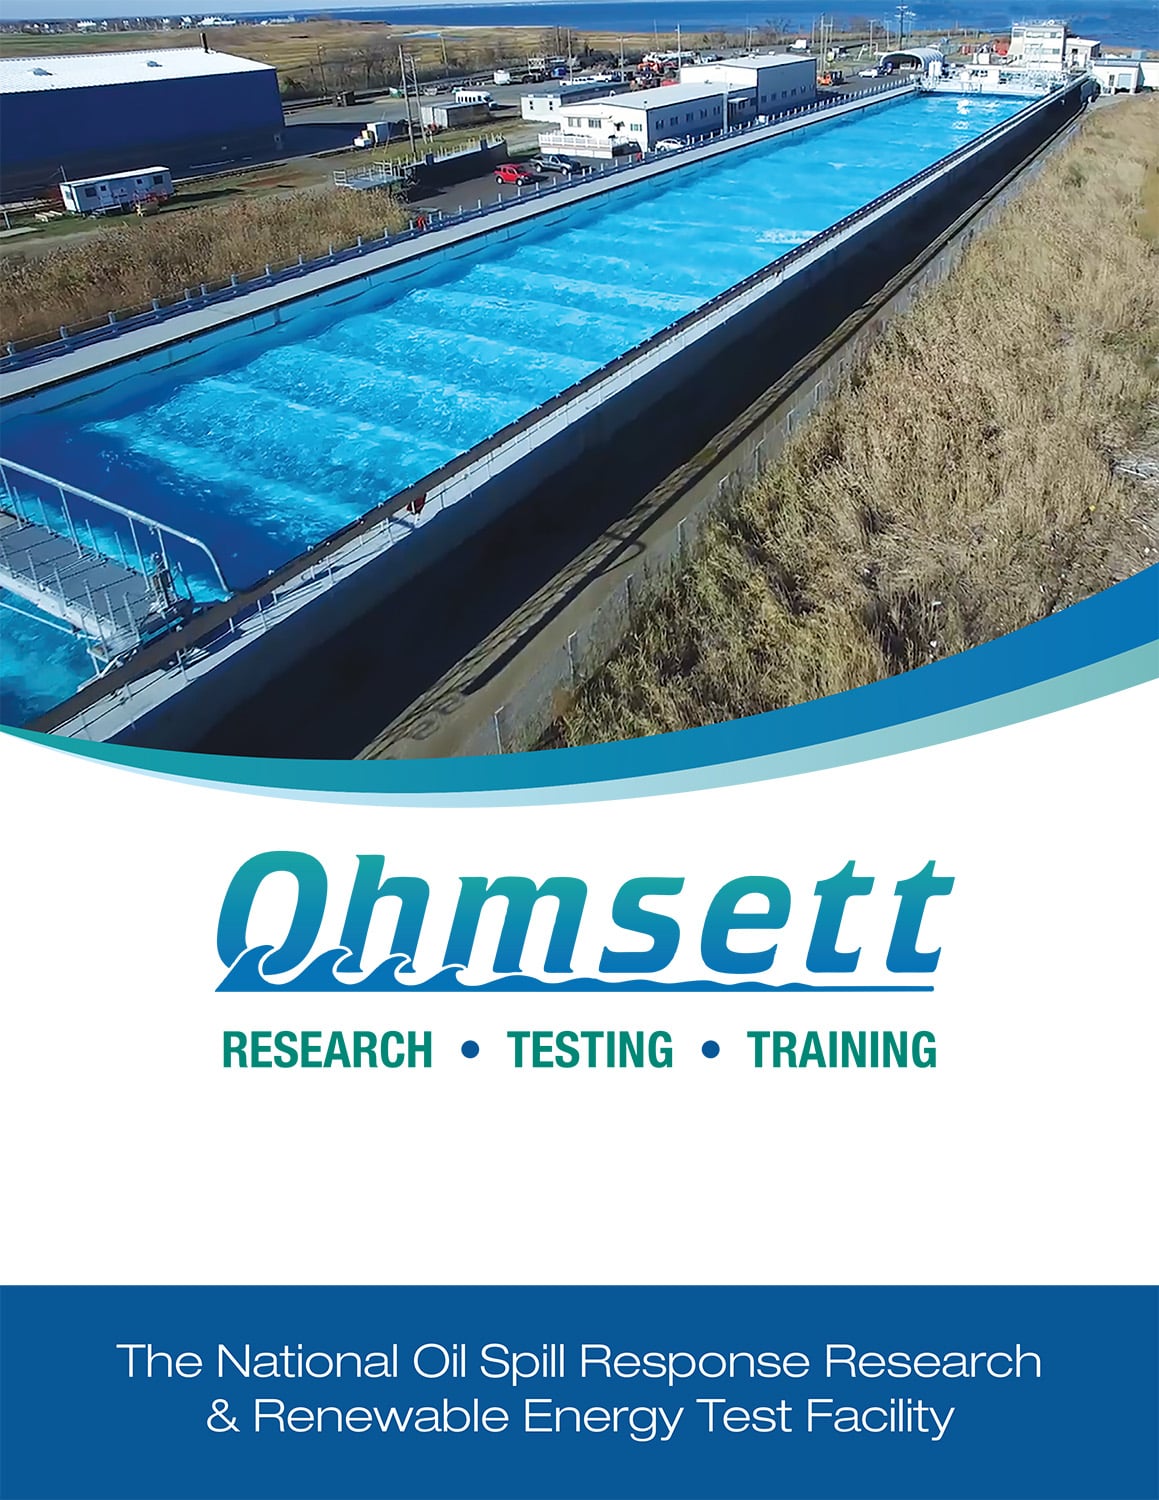 The Ohmsett brochure cover page